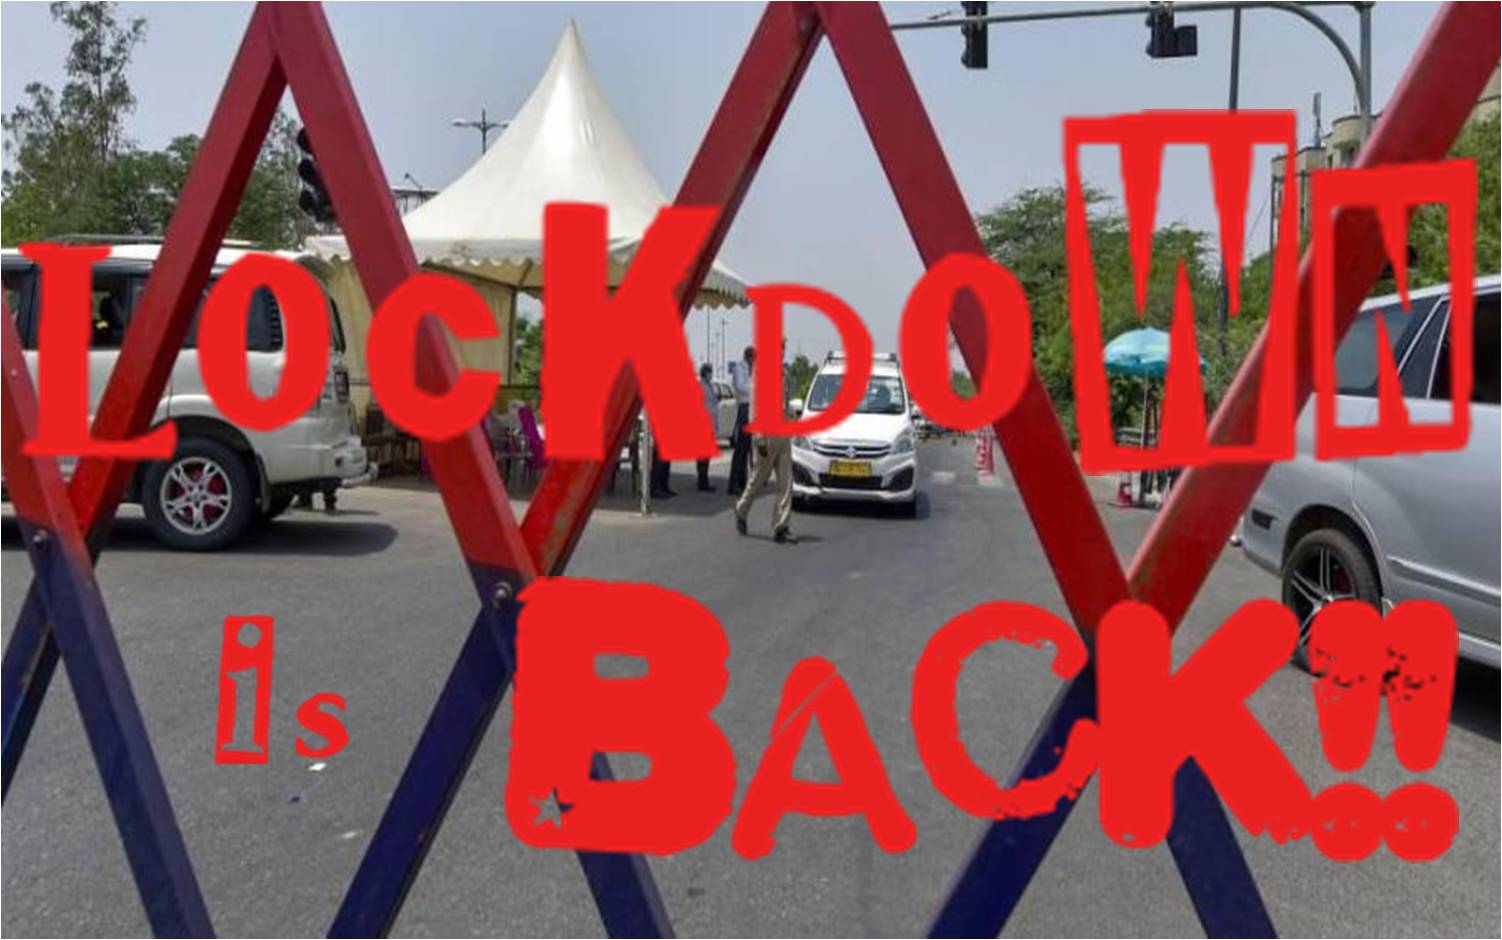 Another knee-jerk reaction | Lockdown may be implemented in Udaipur!